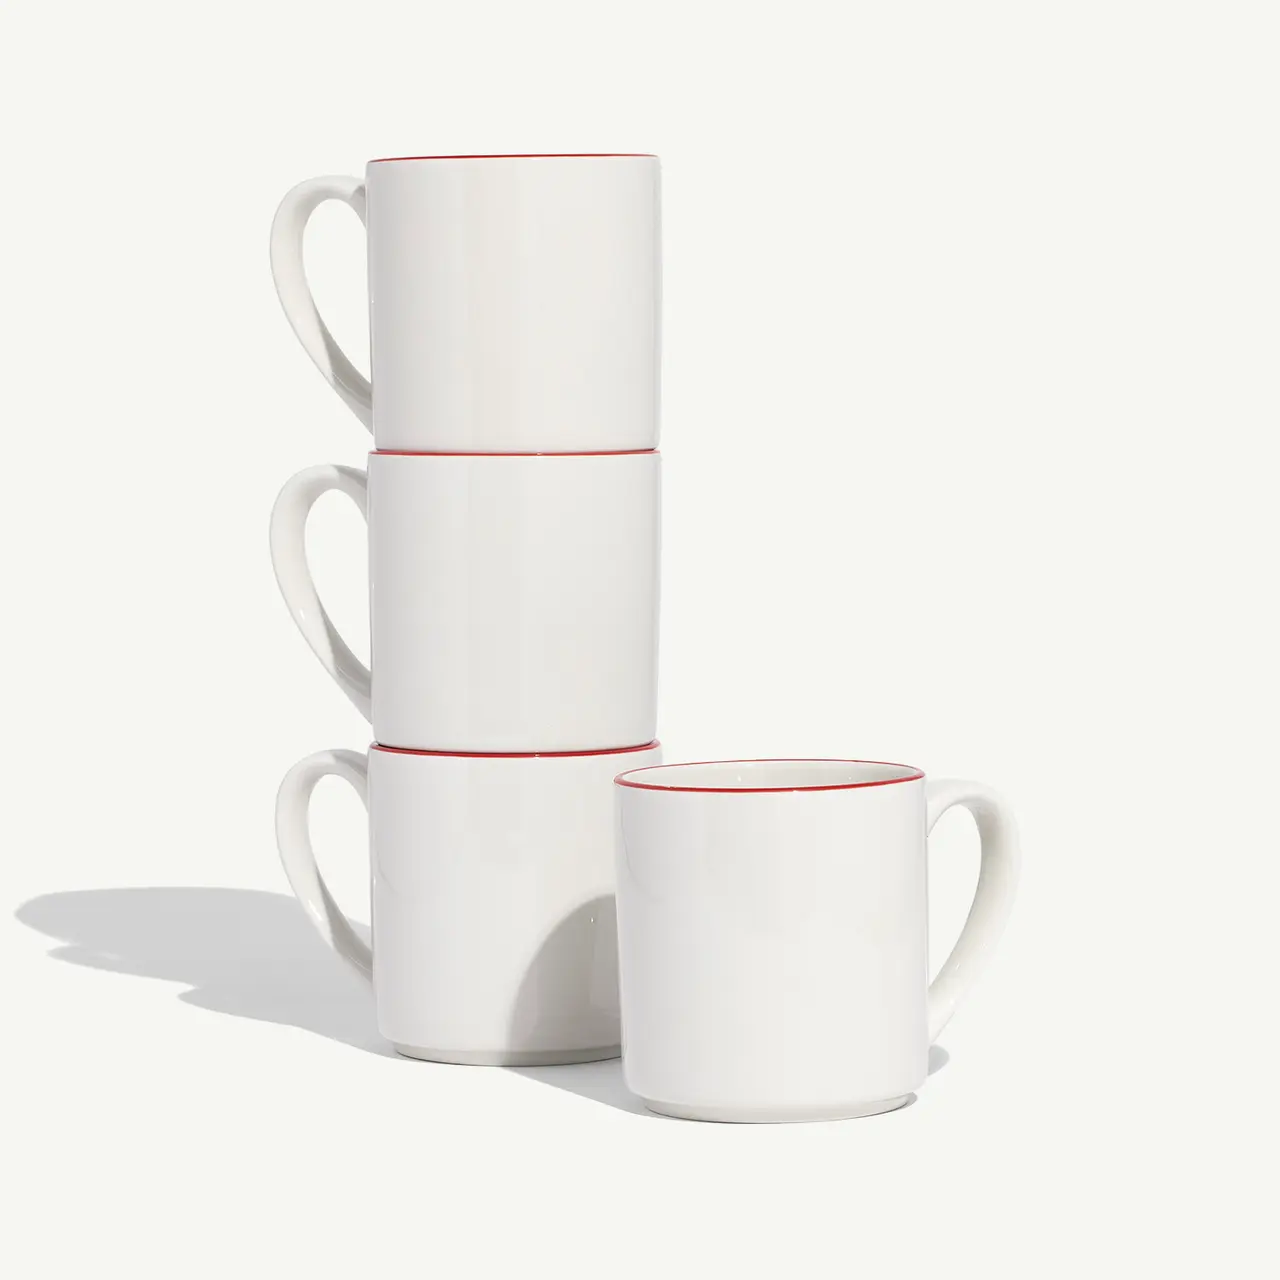 Three stacked white mugs with red rims are positioned next to a fourth mug against a plain background.